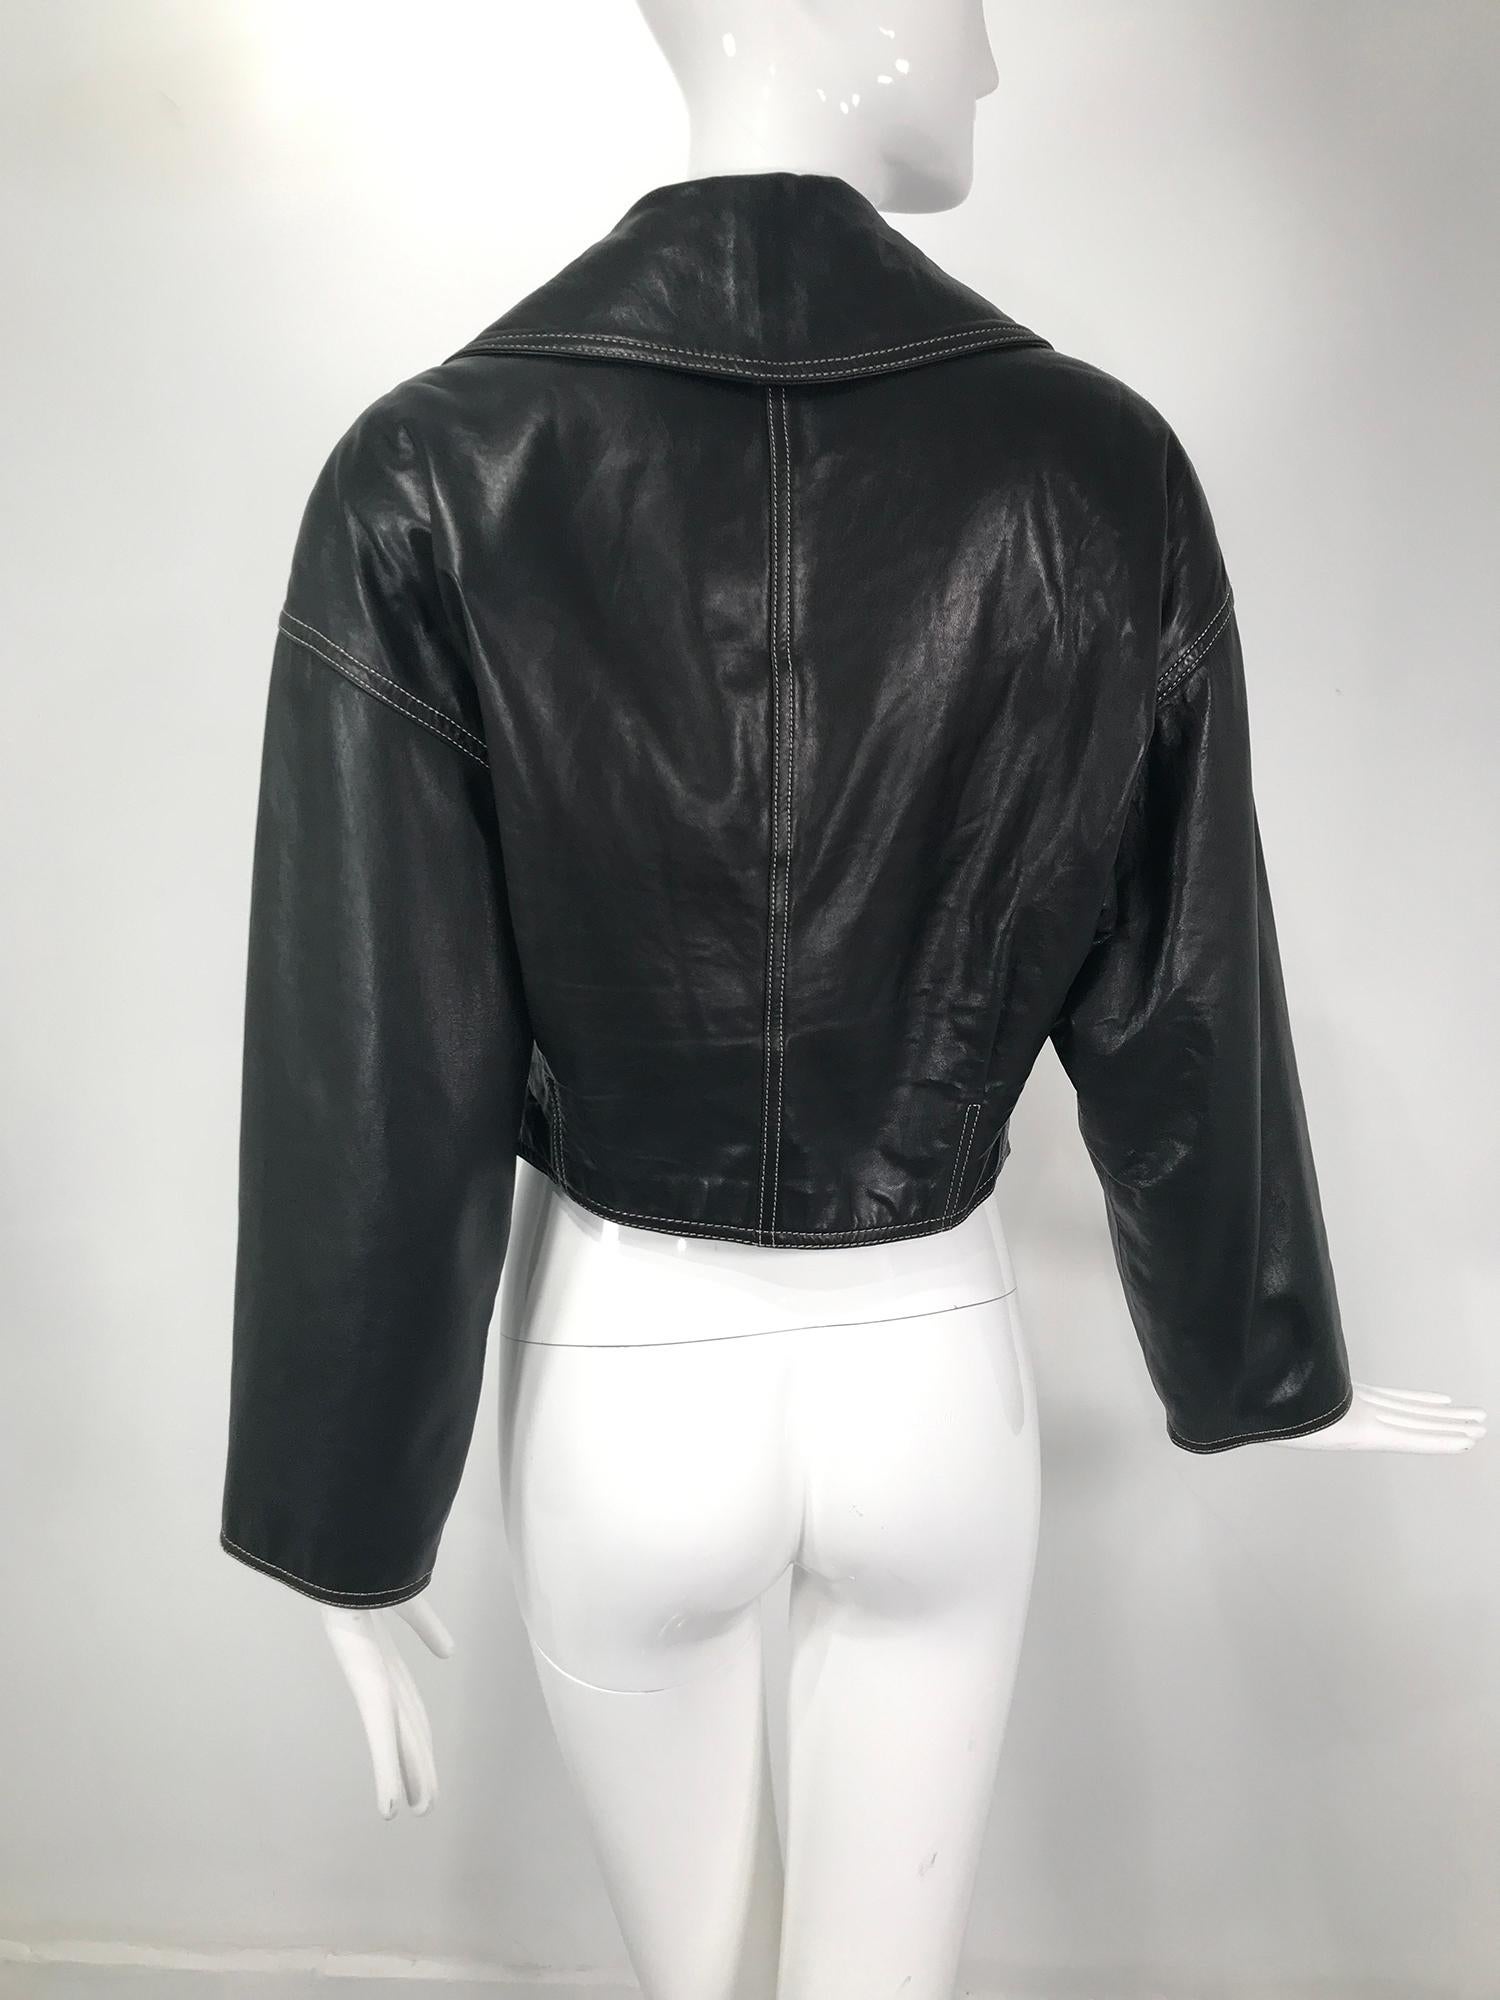 Women's Genny Black Leather Bomber Jacket With Rhinestone Buttons & Gold Stitching 1980s